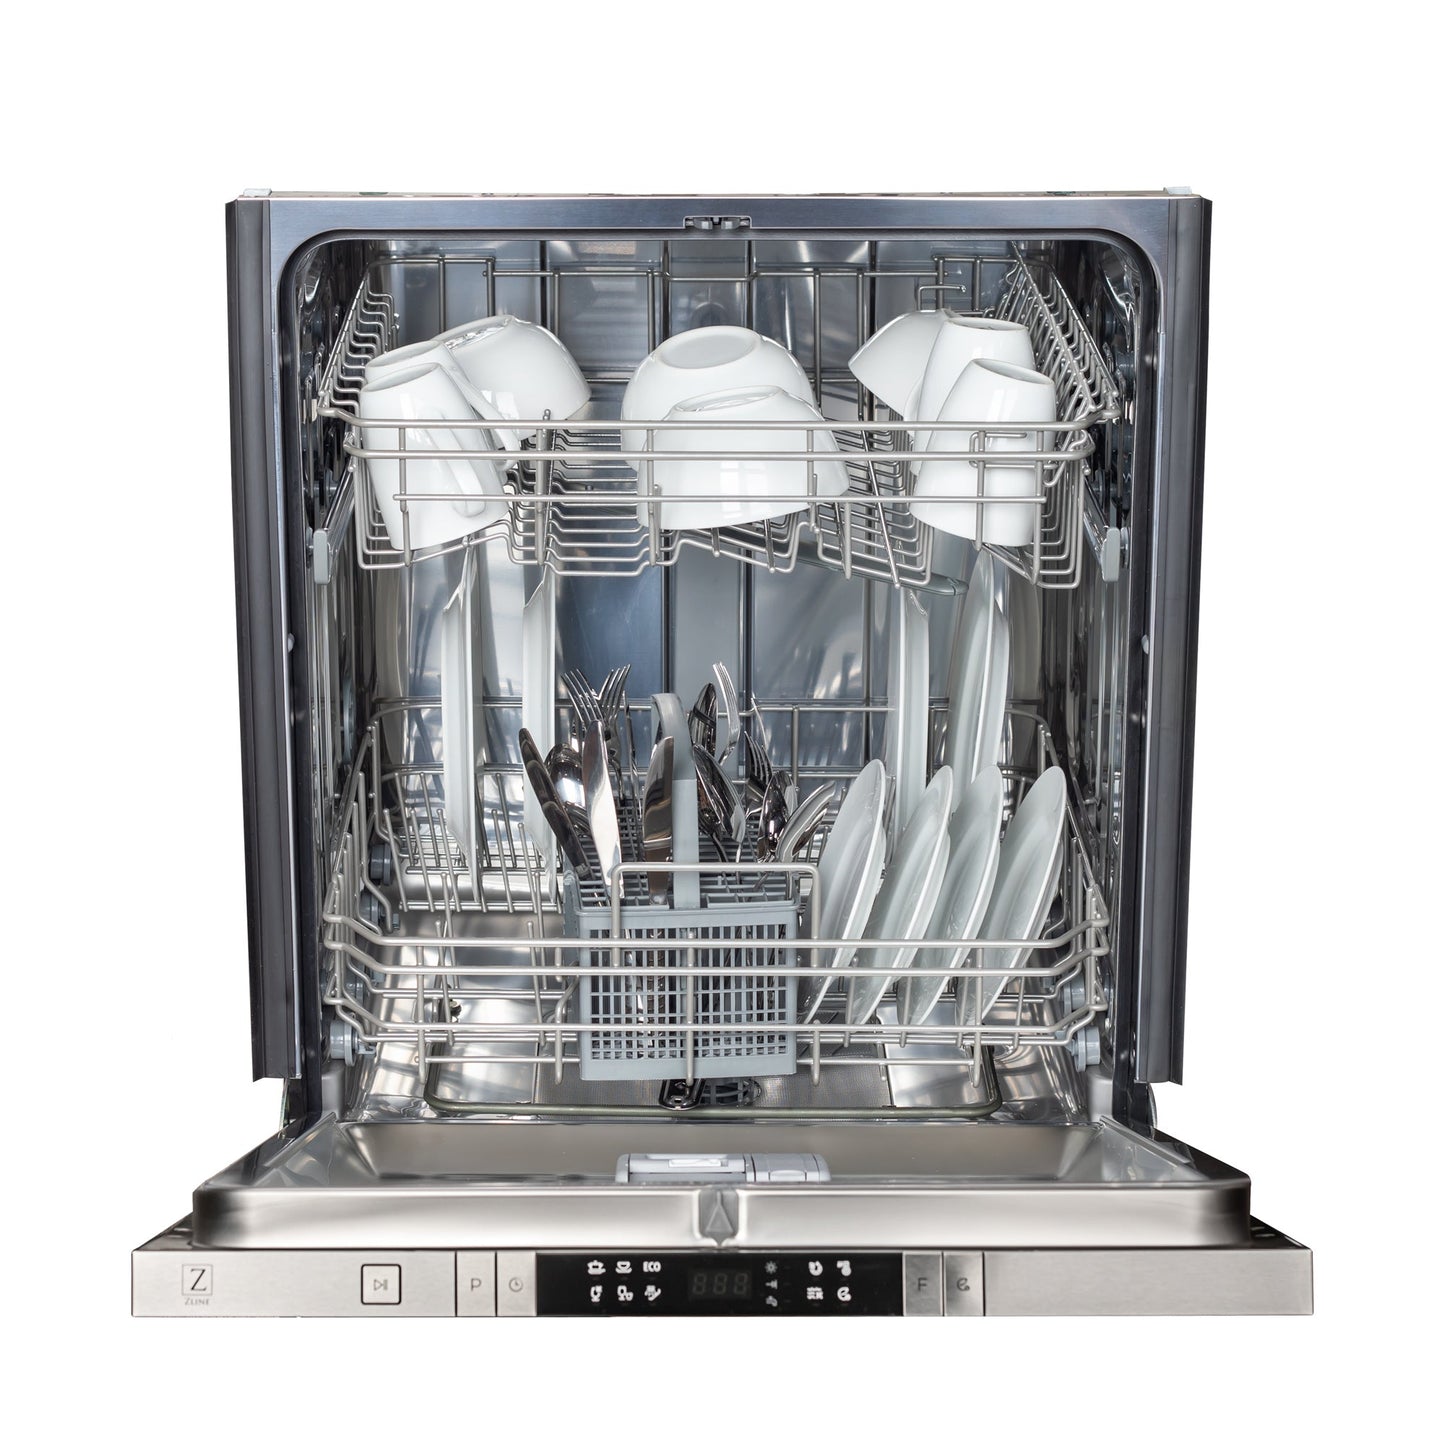 ZLINE 24 in. Top Control Dishwasher with White Matte Panel and Modern Style Handle, 52dBa (DW-WM-H-24)